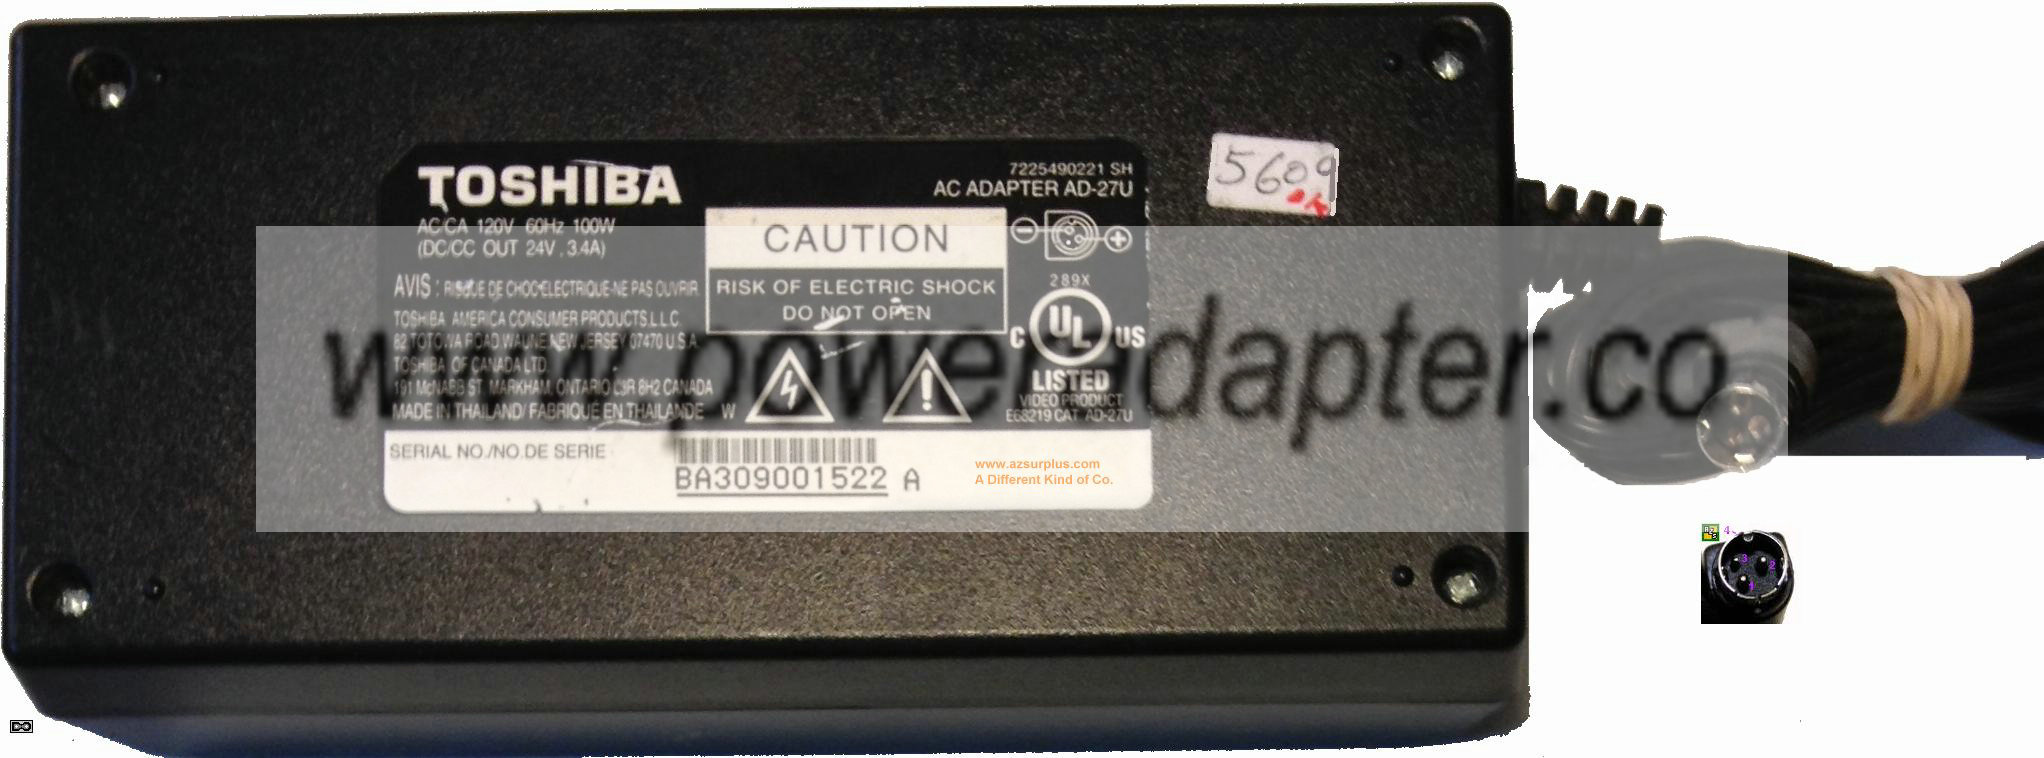 Toshiba AD-27U AC Adapter 24Vdc 3.4A Used Power supply 3 Pin Min - Click Image to Close